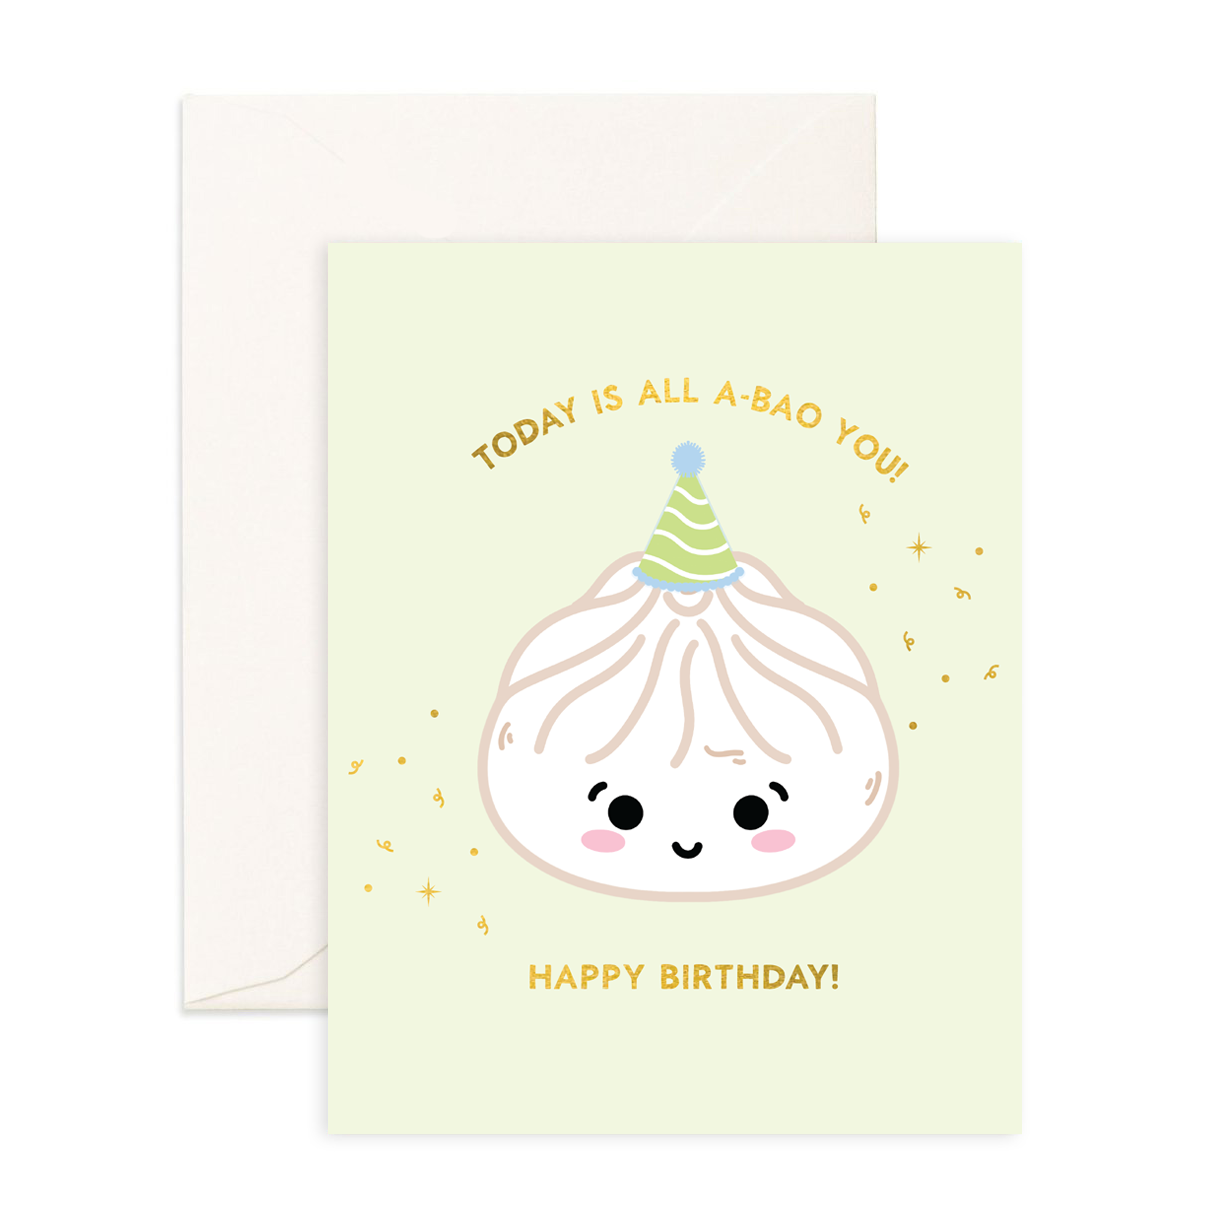 Today is All A-Bao You! - Greeting Card | Bookazine HK